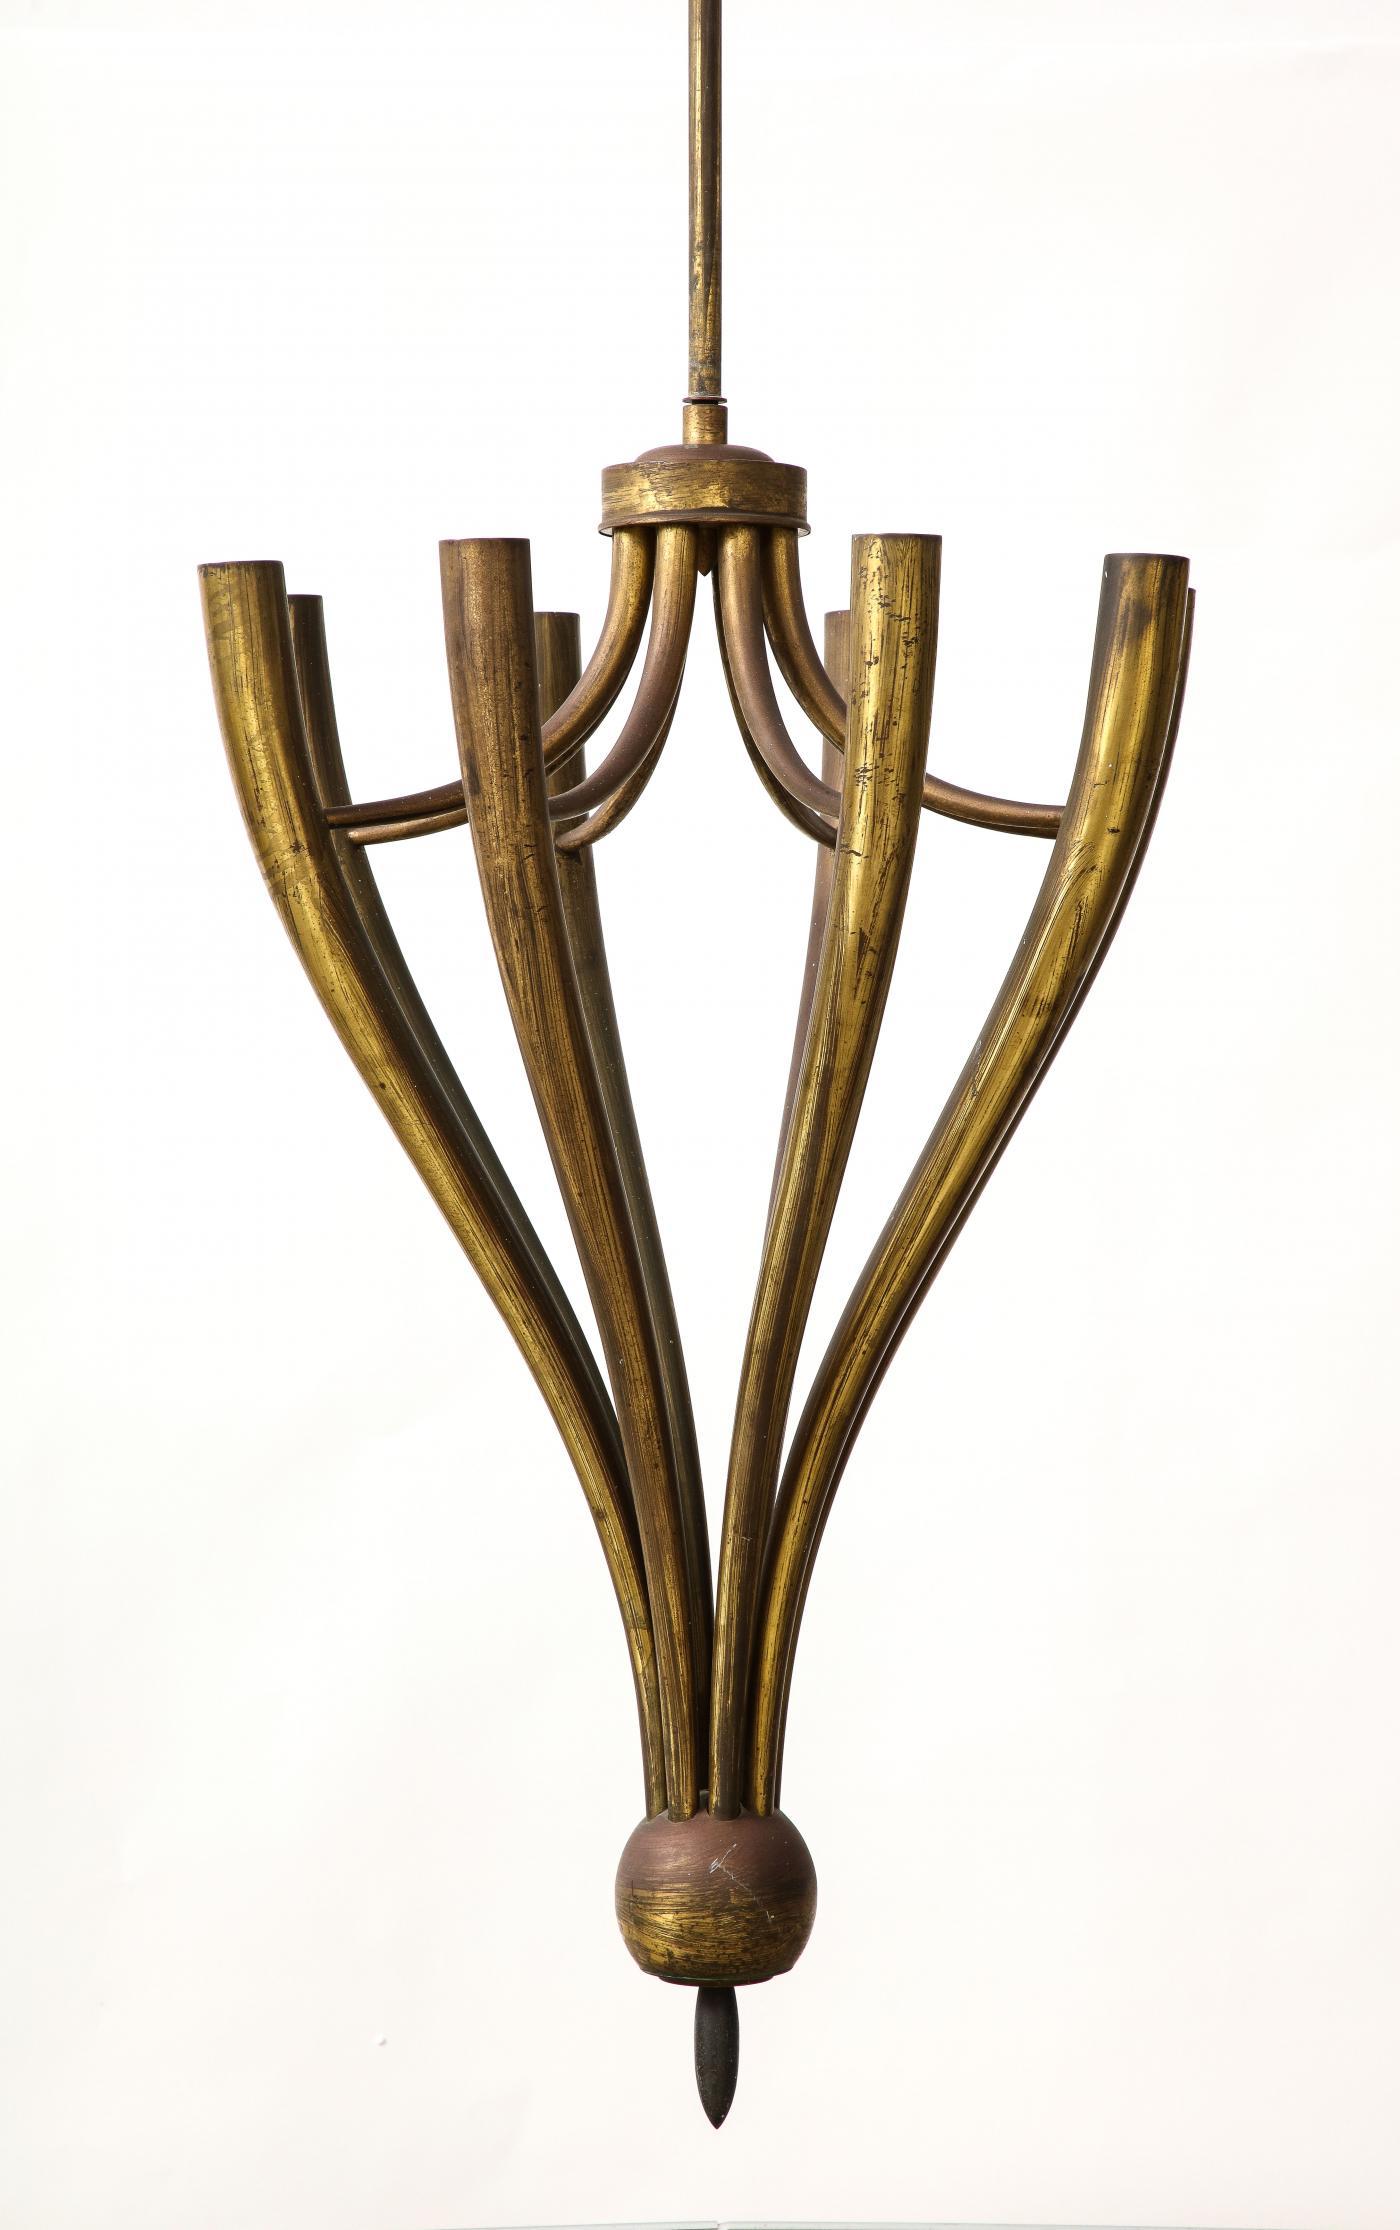 Eight-Arm Patinated Brass Chandelier by Guglielmo Ulrich, Italy, c. 1950 For Sale 1